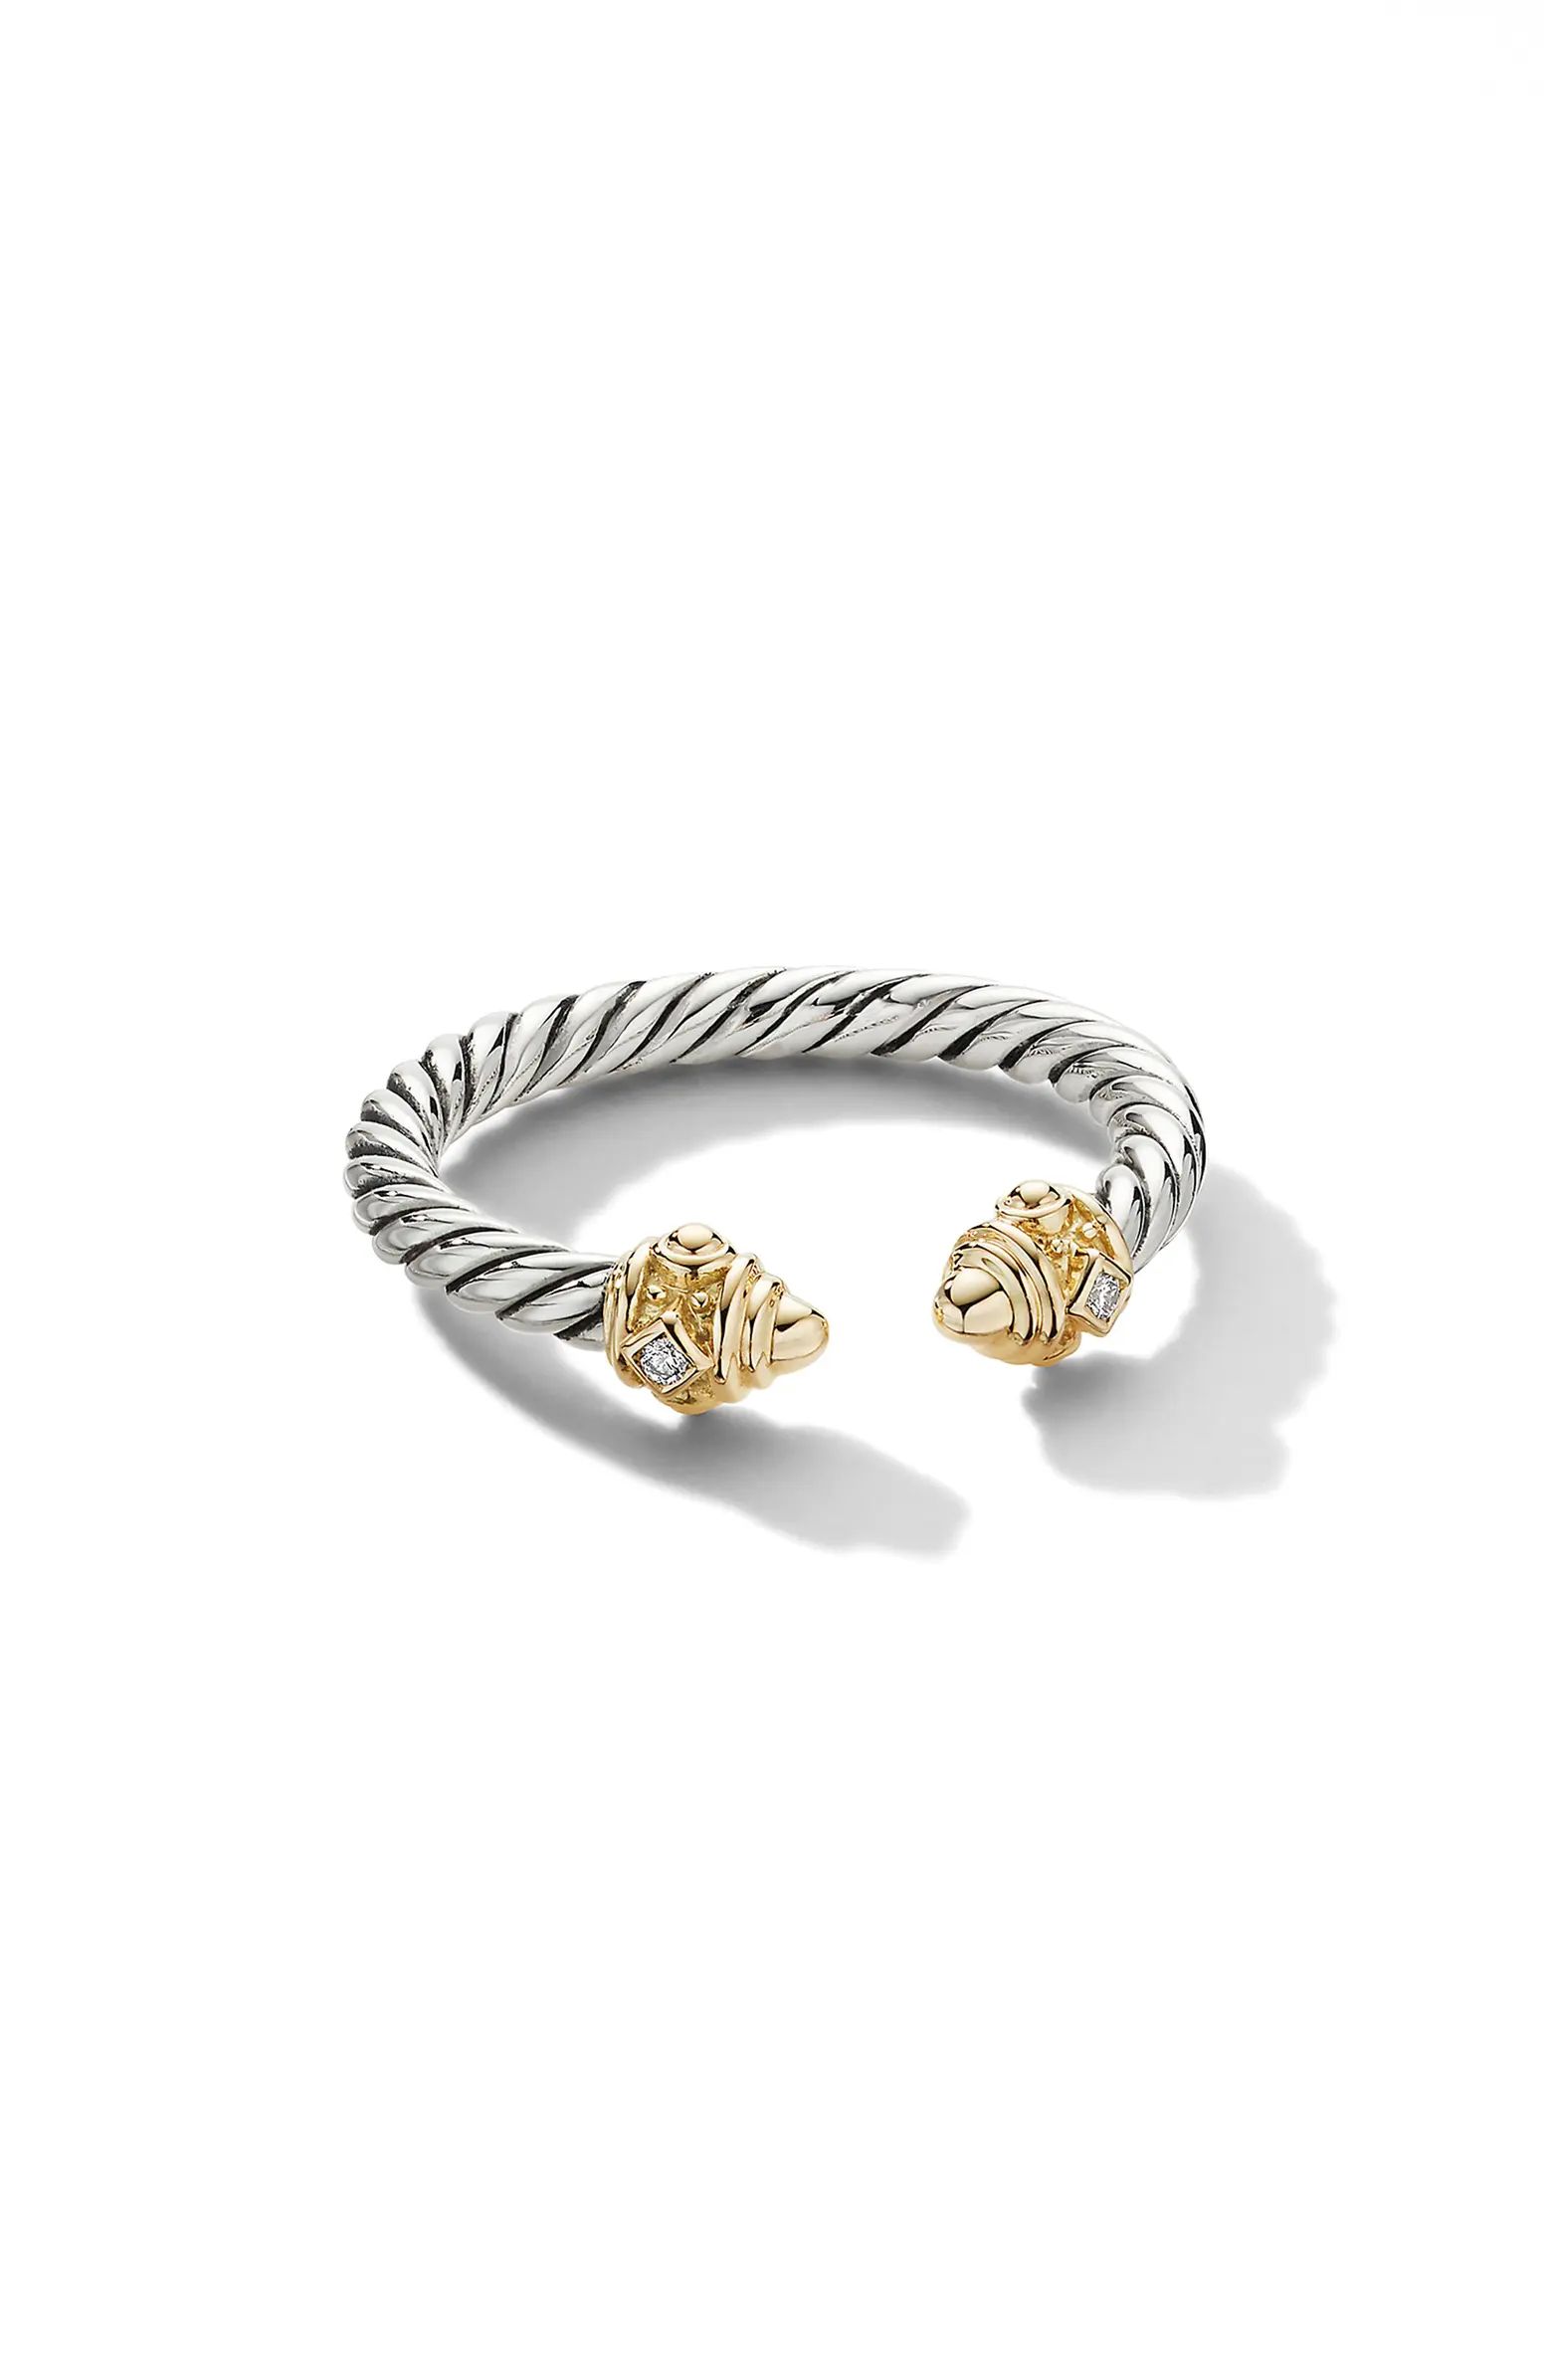 Renaissance® Ring in 14K Gold with Diamonds | Nordstrom